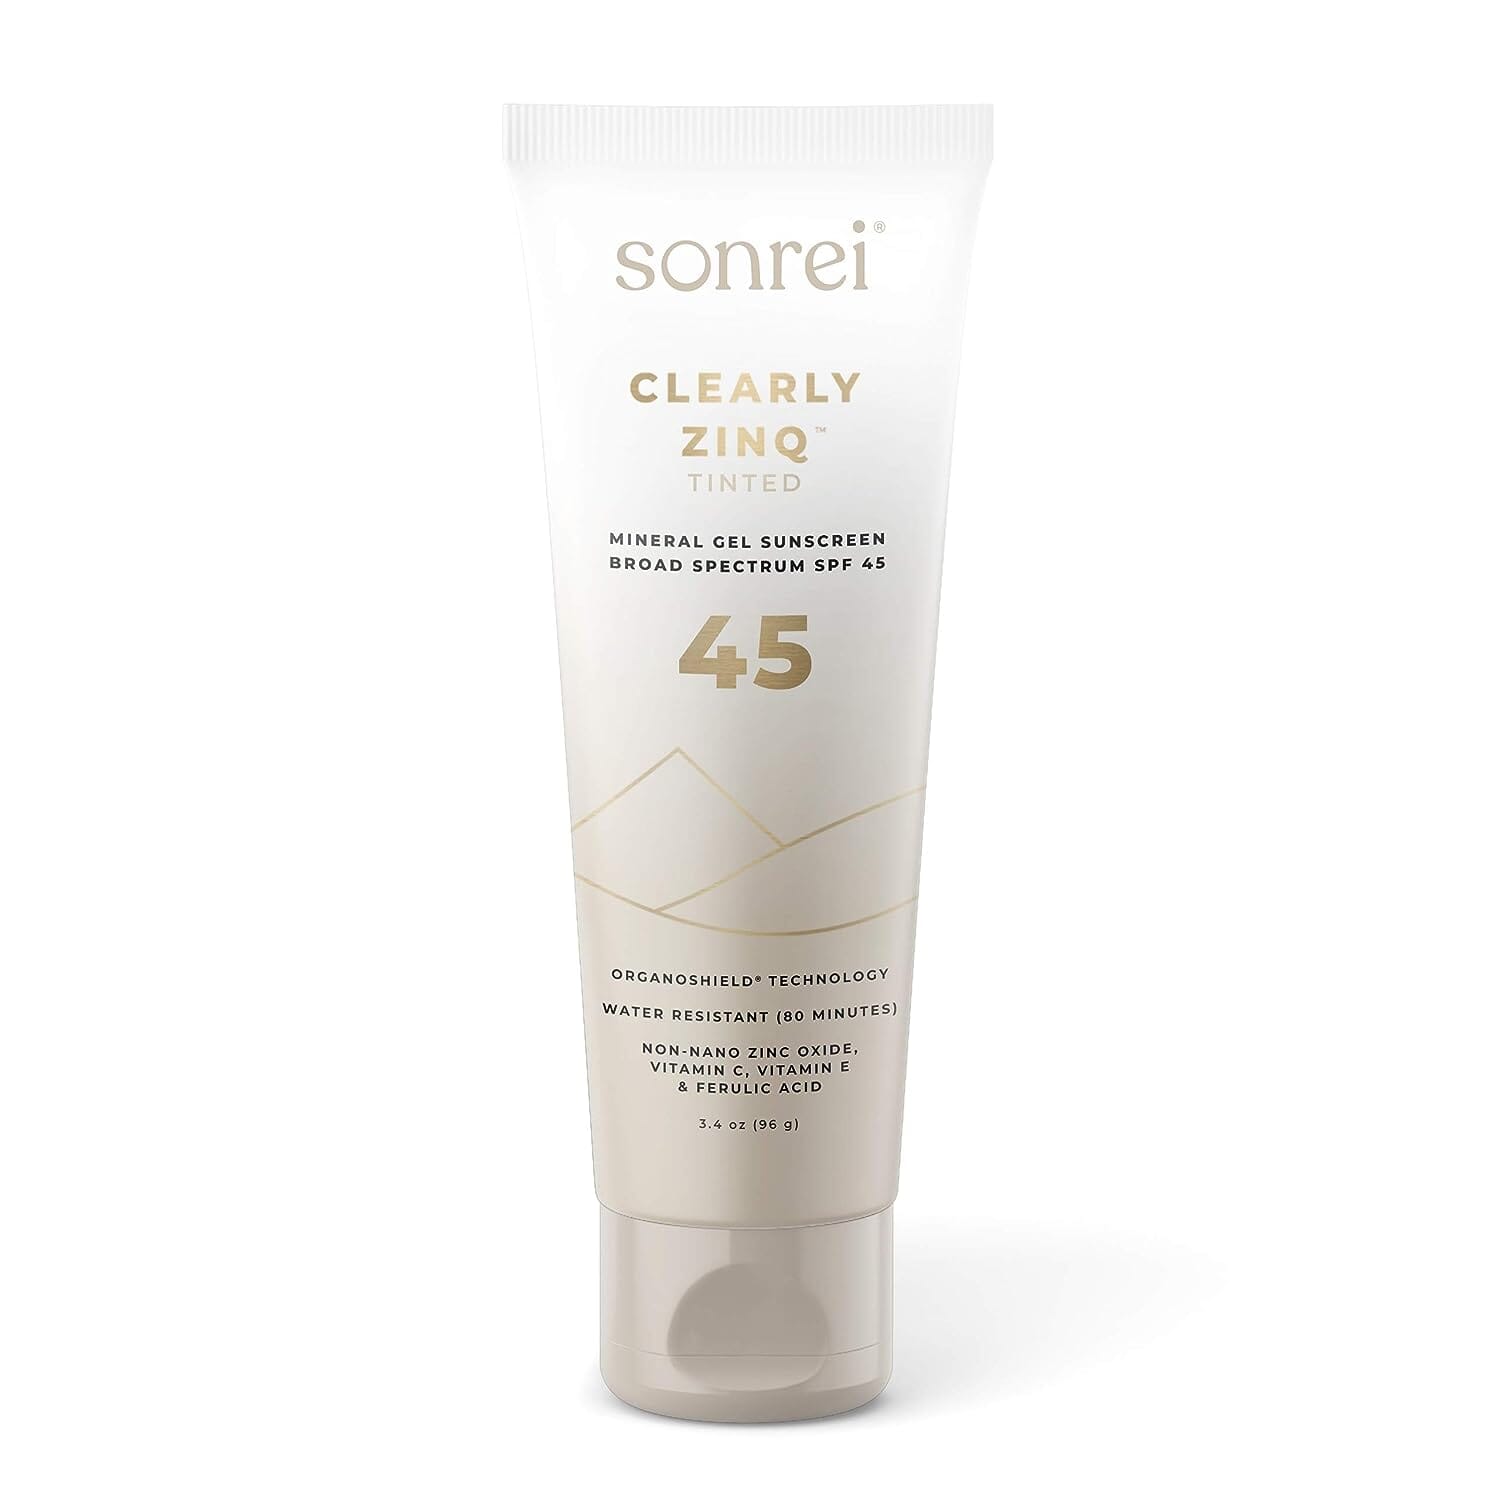 Sonrei Clearly Zinq Tinted SPF 45 Mineral Sunscreen Gel Sunscreen Sonrei 3.4 oz. Shop at Exclusive Beauty Club